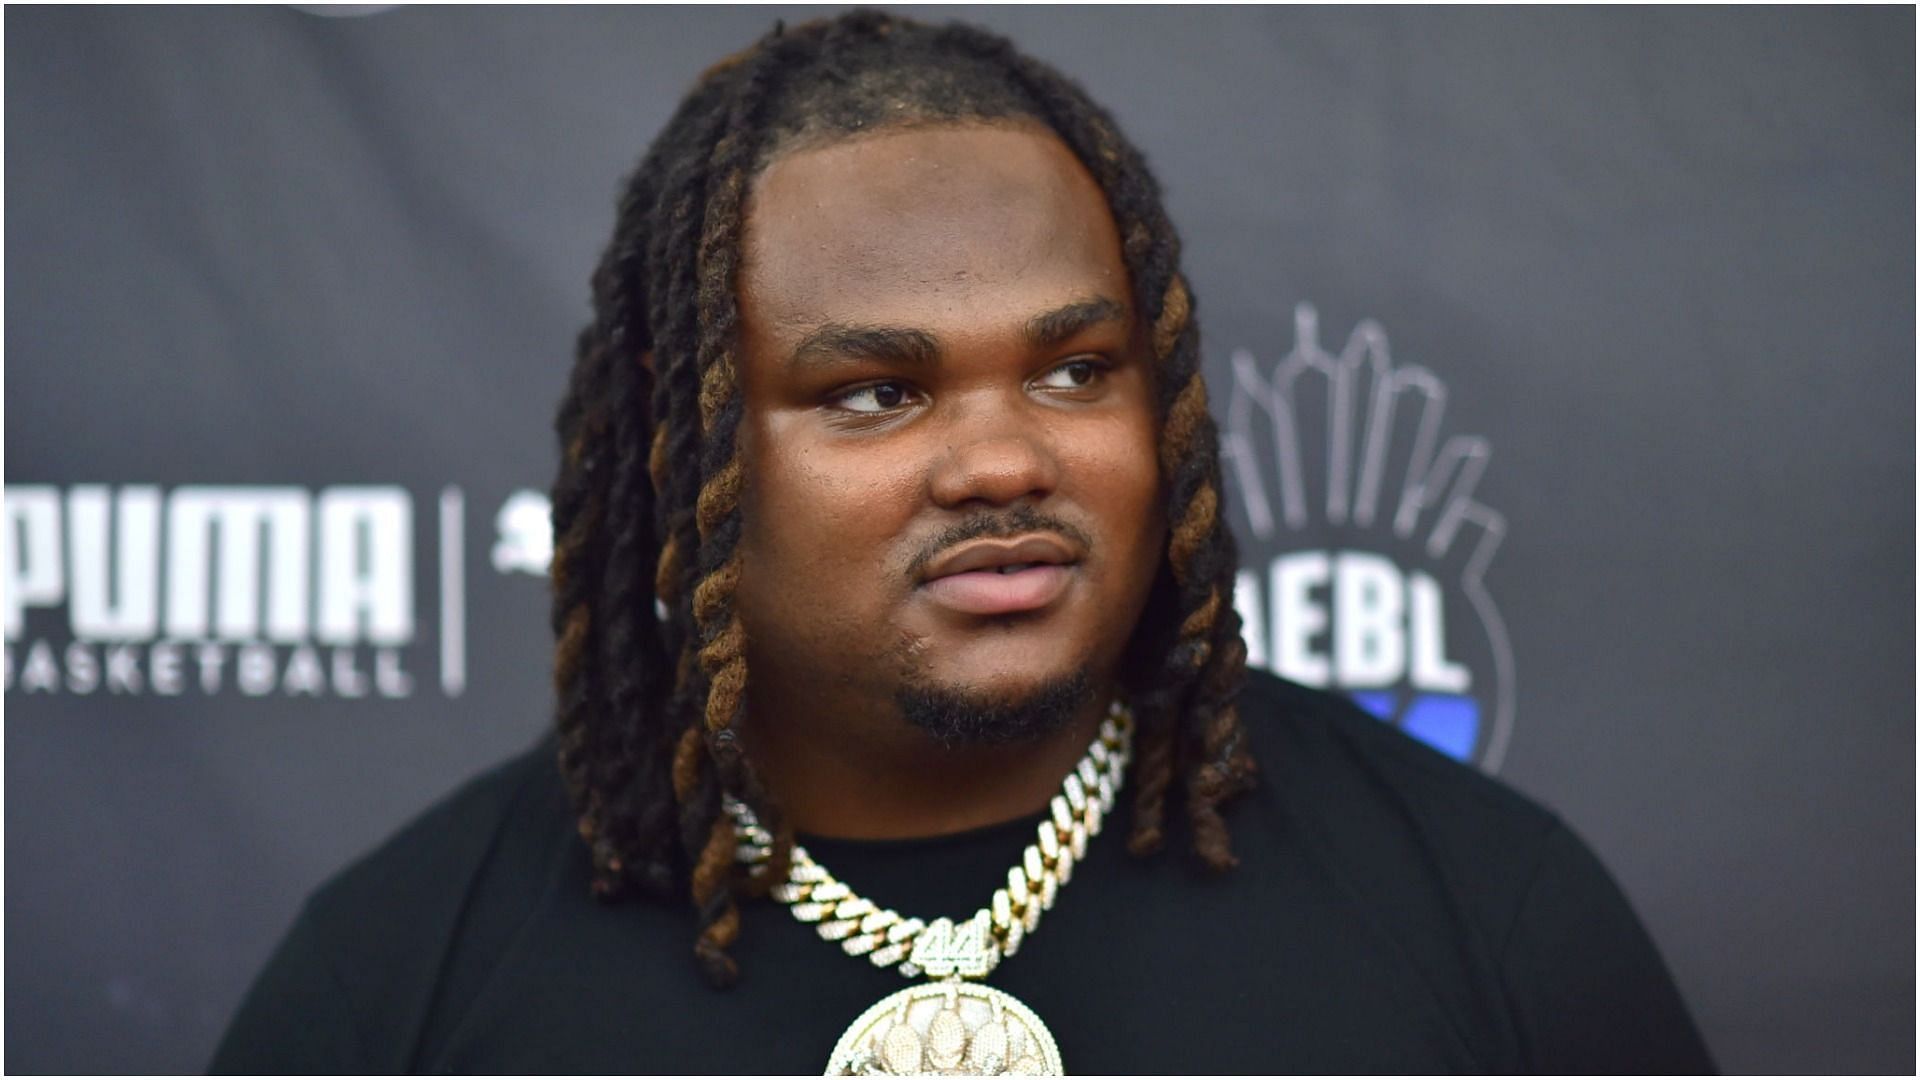 Who is My'Eisha Agnew? All about Tee Grizzley's baby mama as rapper announces engagement